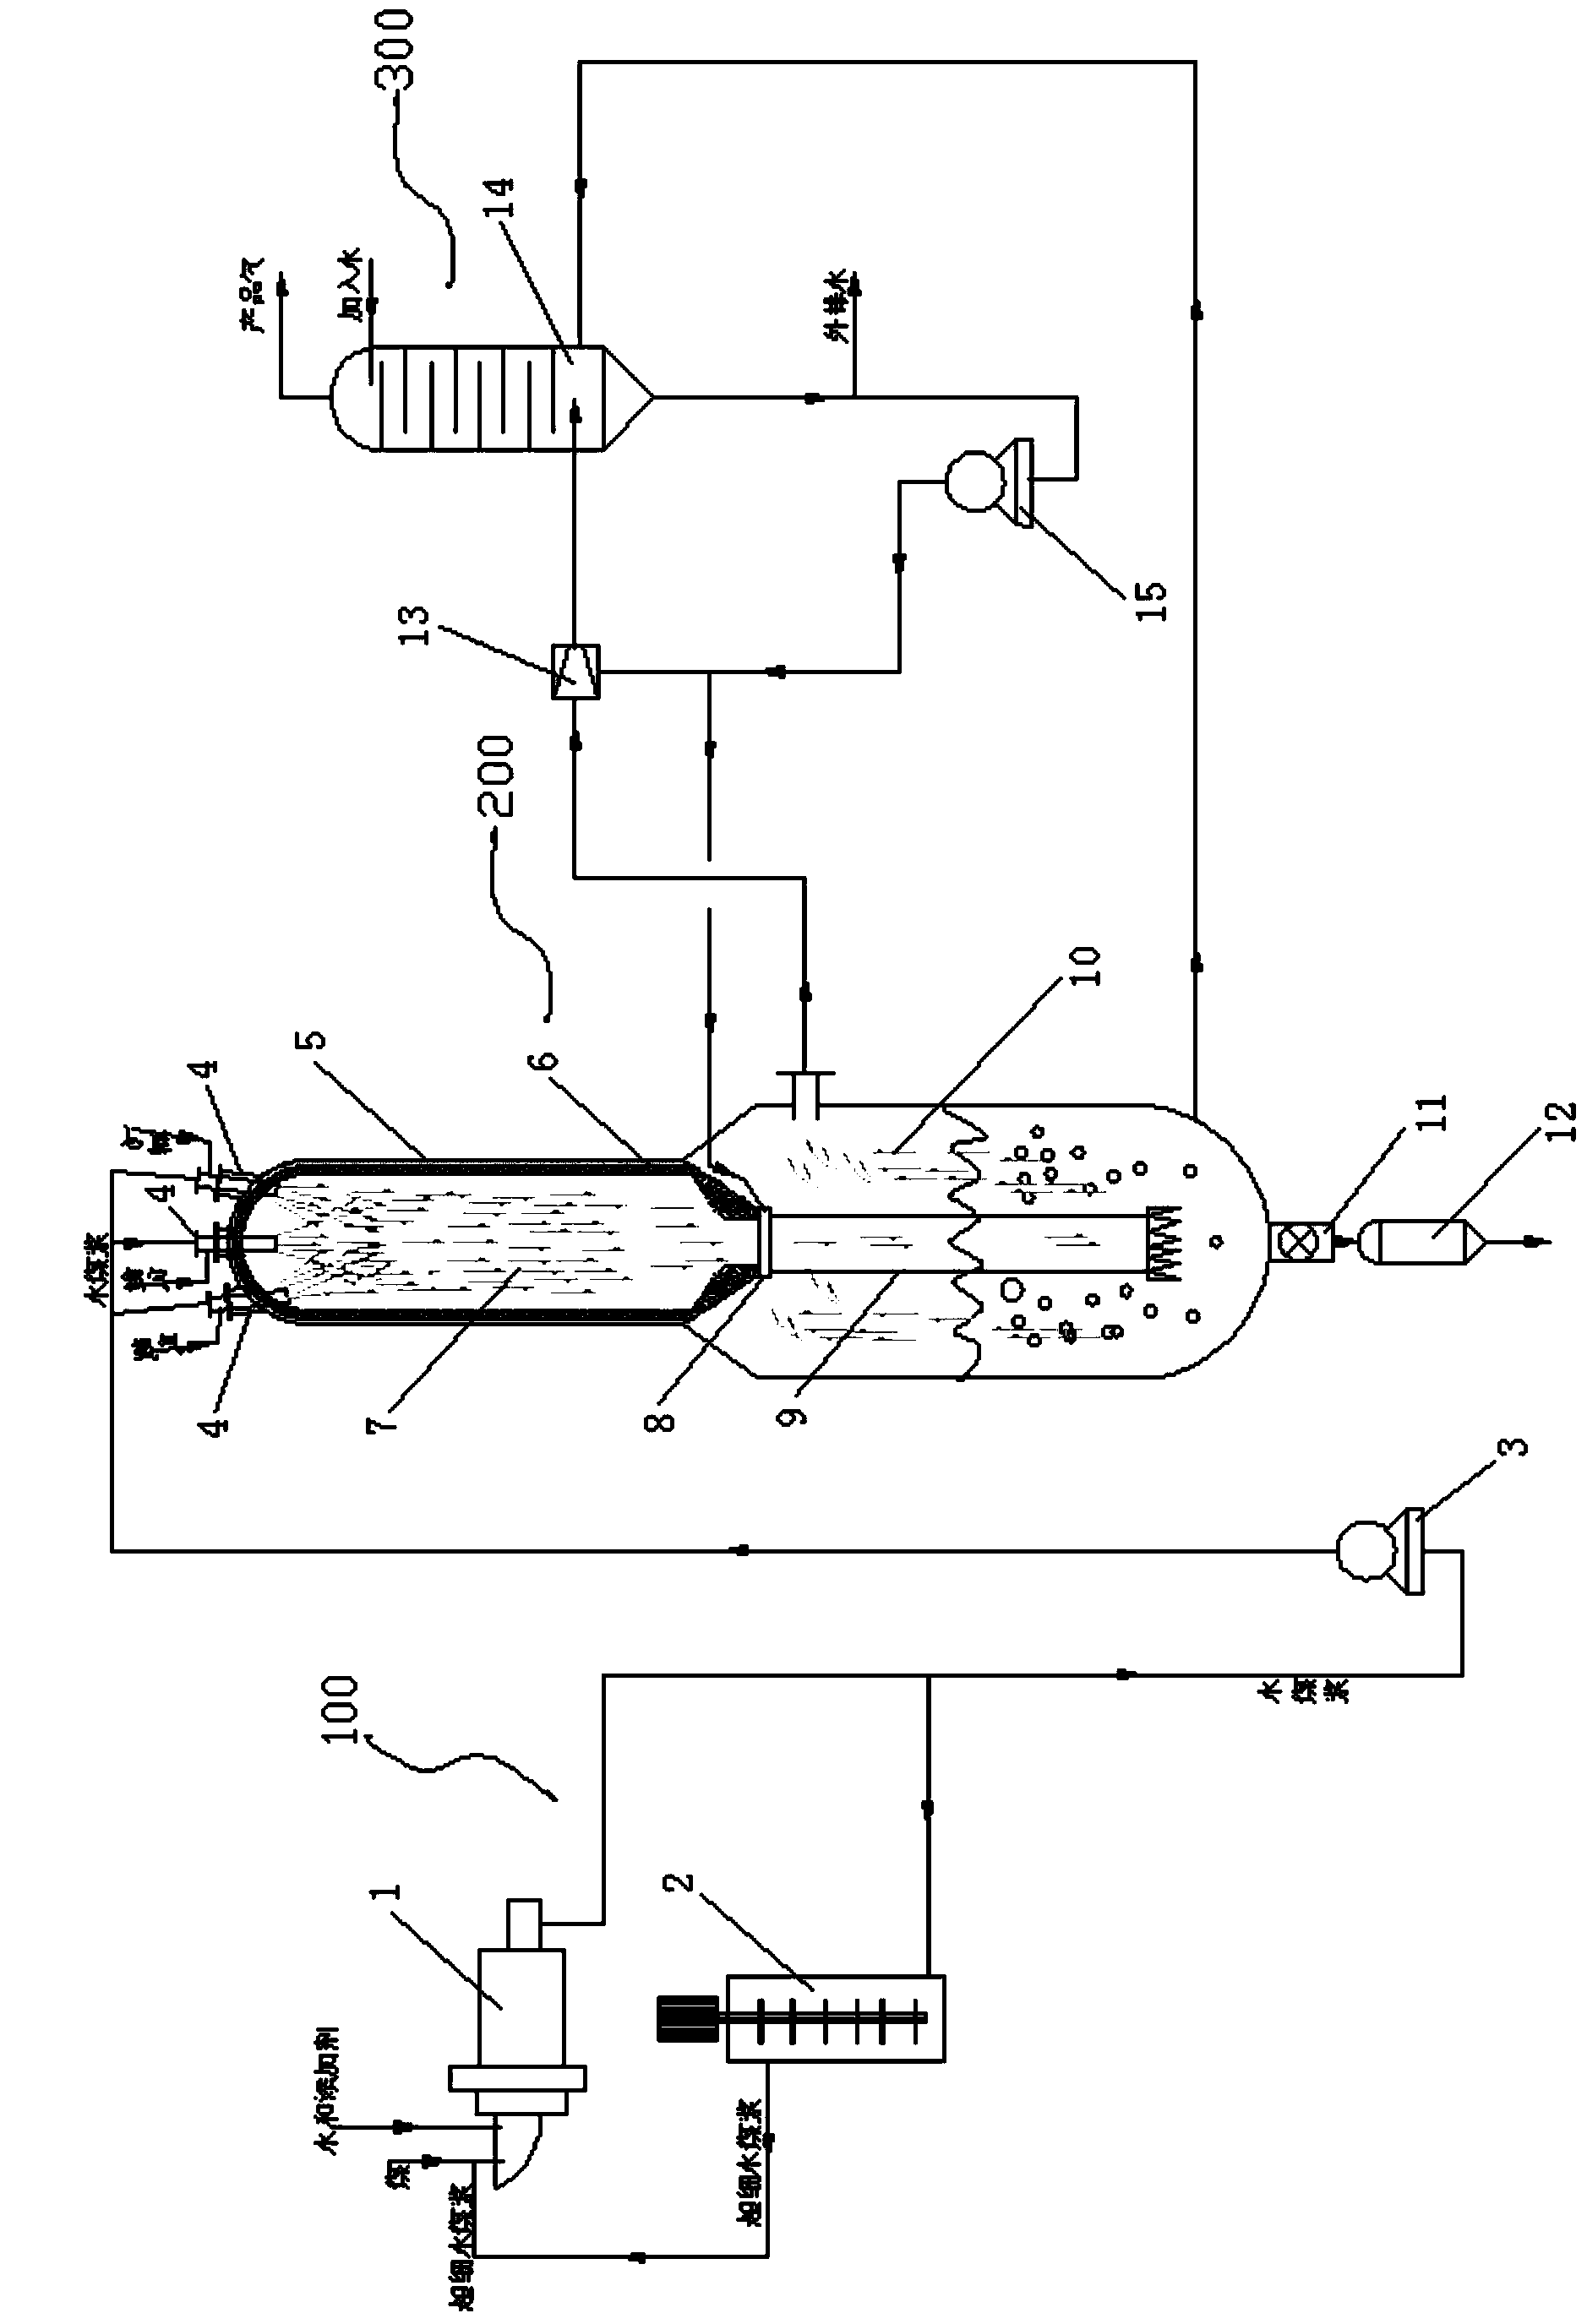 Synclastic multi-shaft gasification device